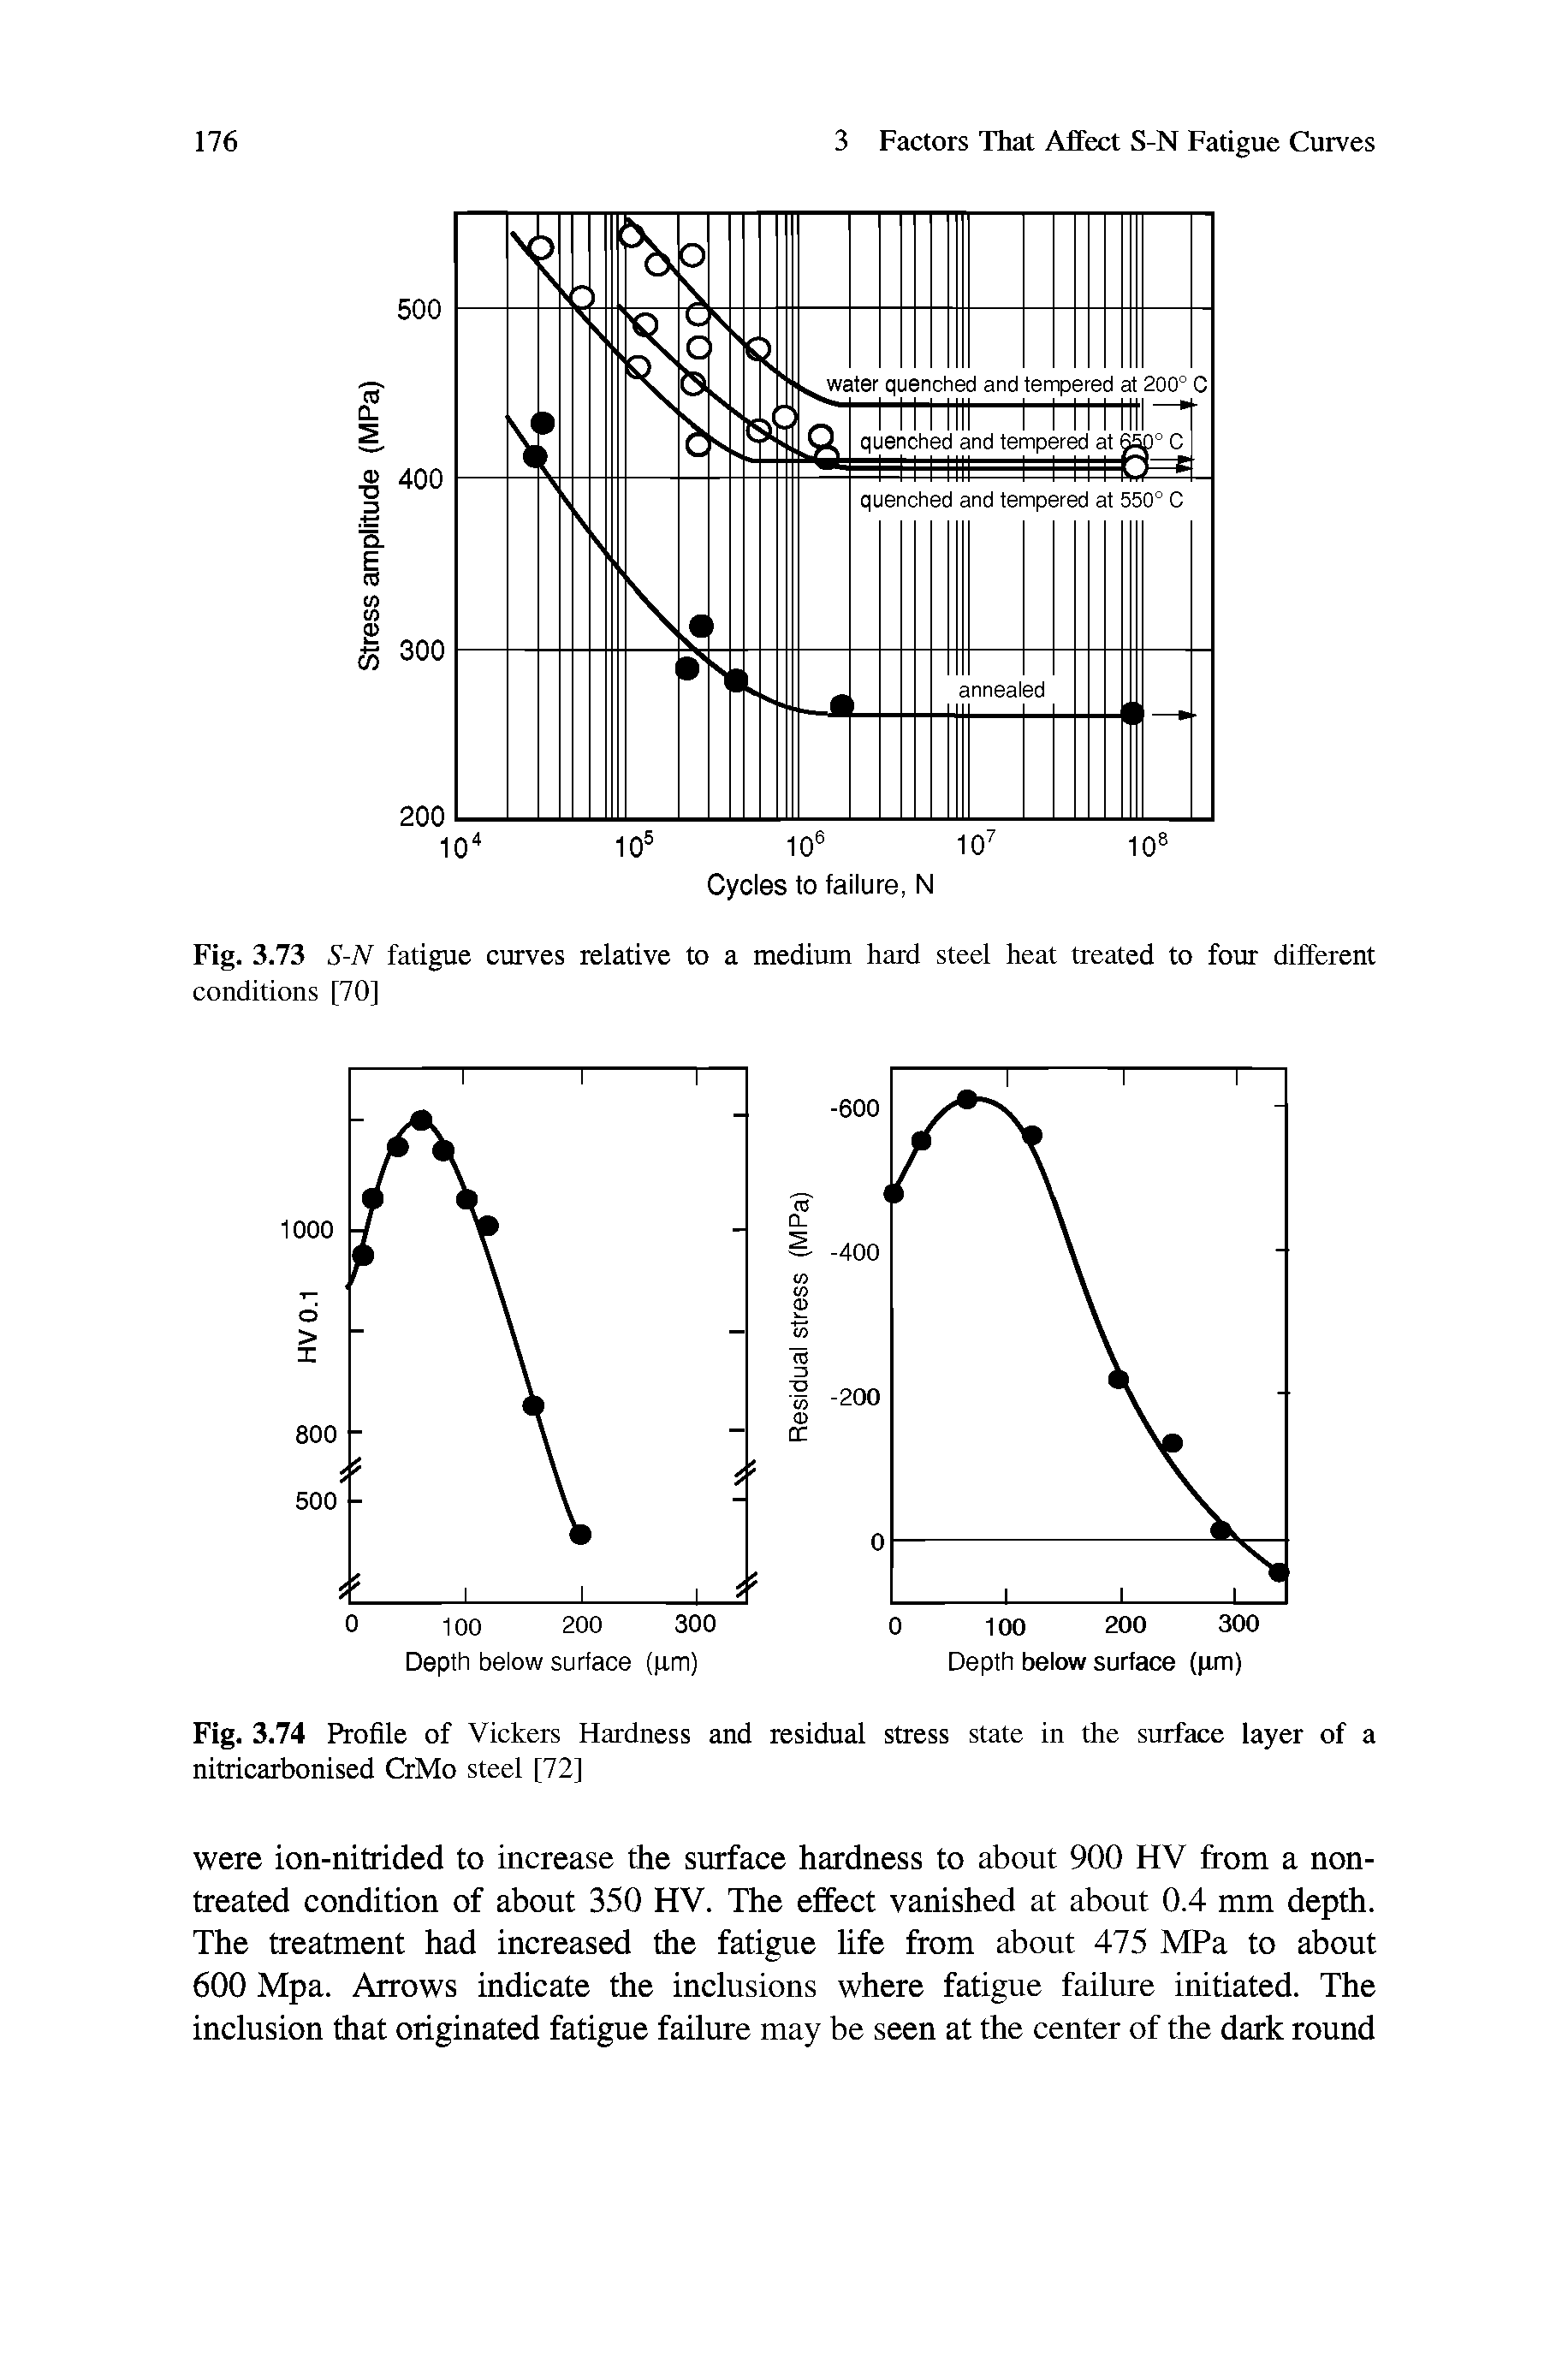 Fig. 3.73 S-N fatigue curves relative to a medium hard steel heat treated to four different conditions [70]...